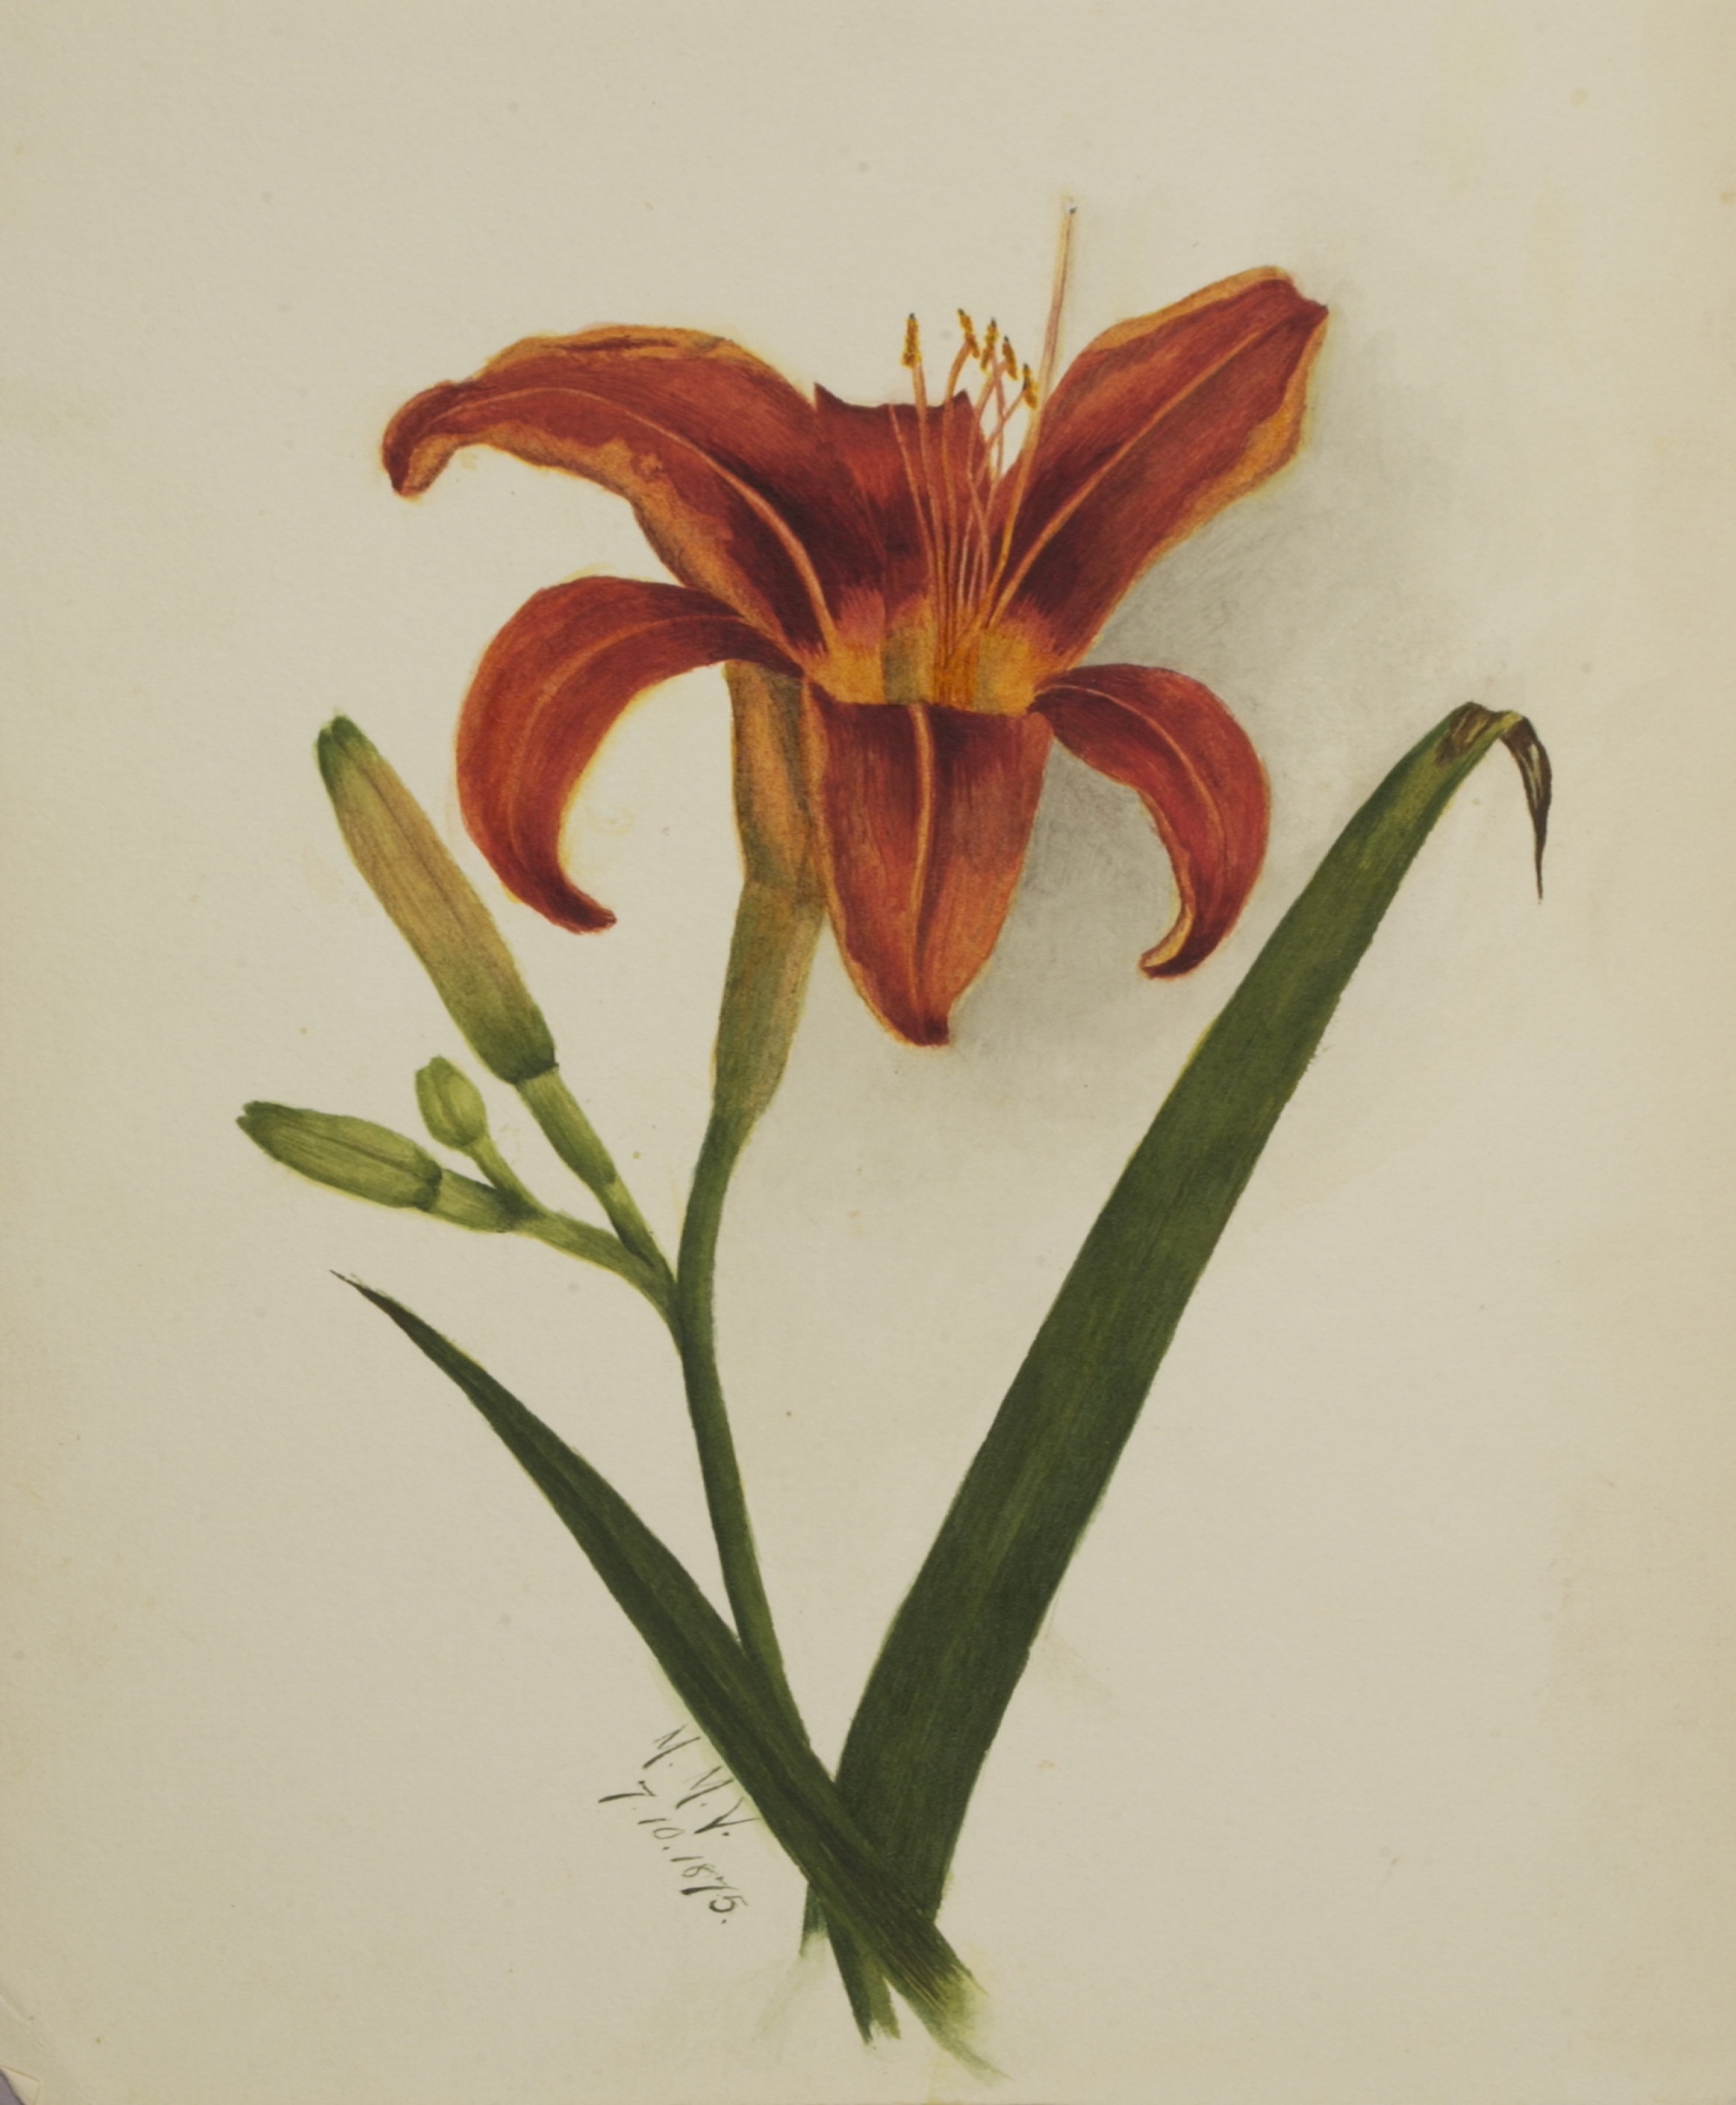 1875 Day Lily illustration by Mary Vaux Walcott.